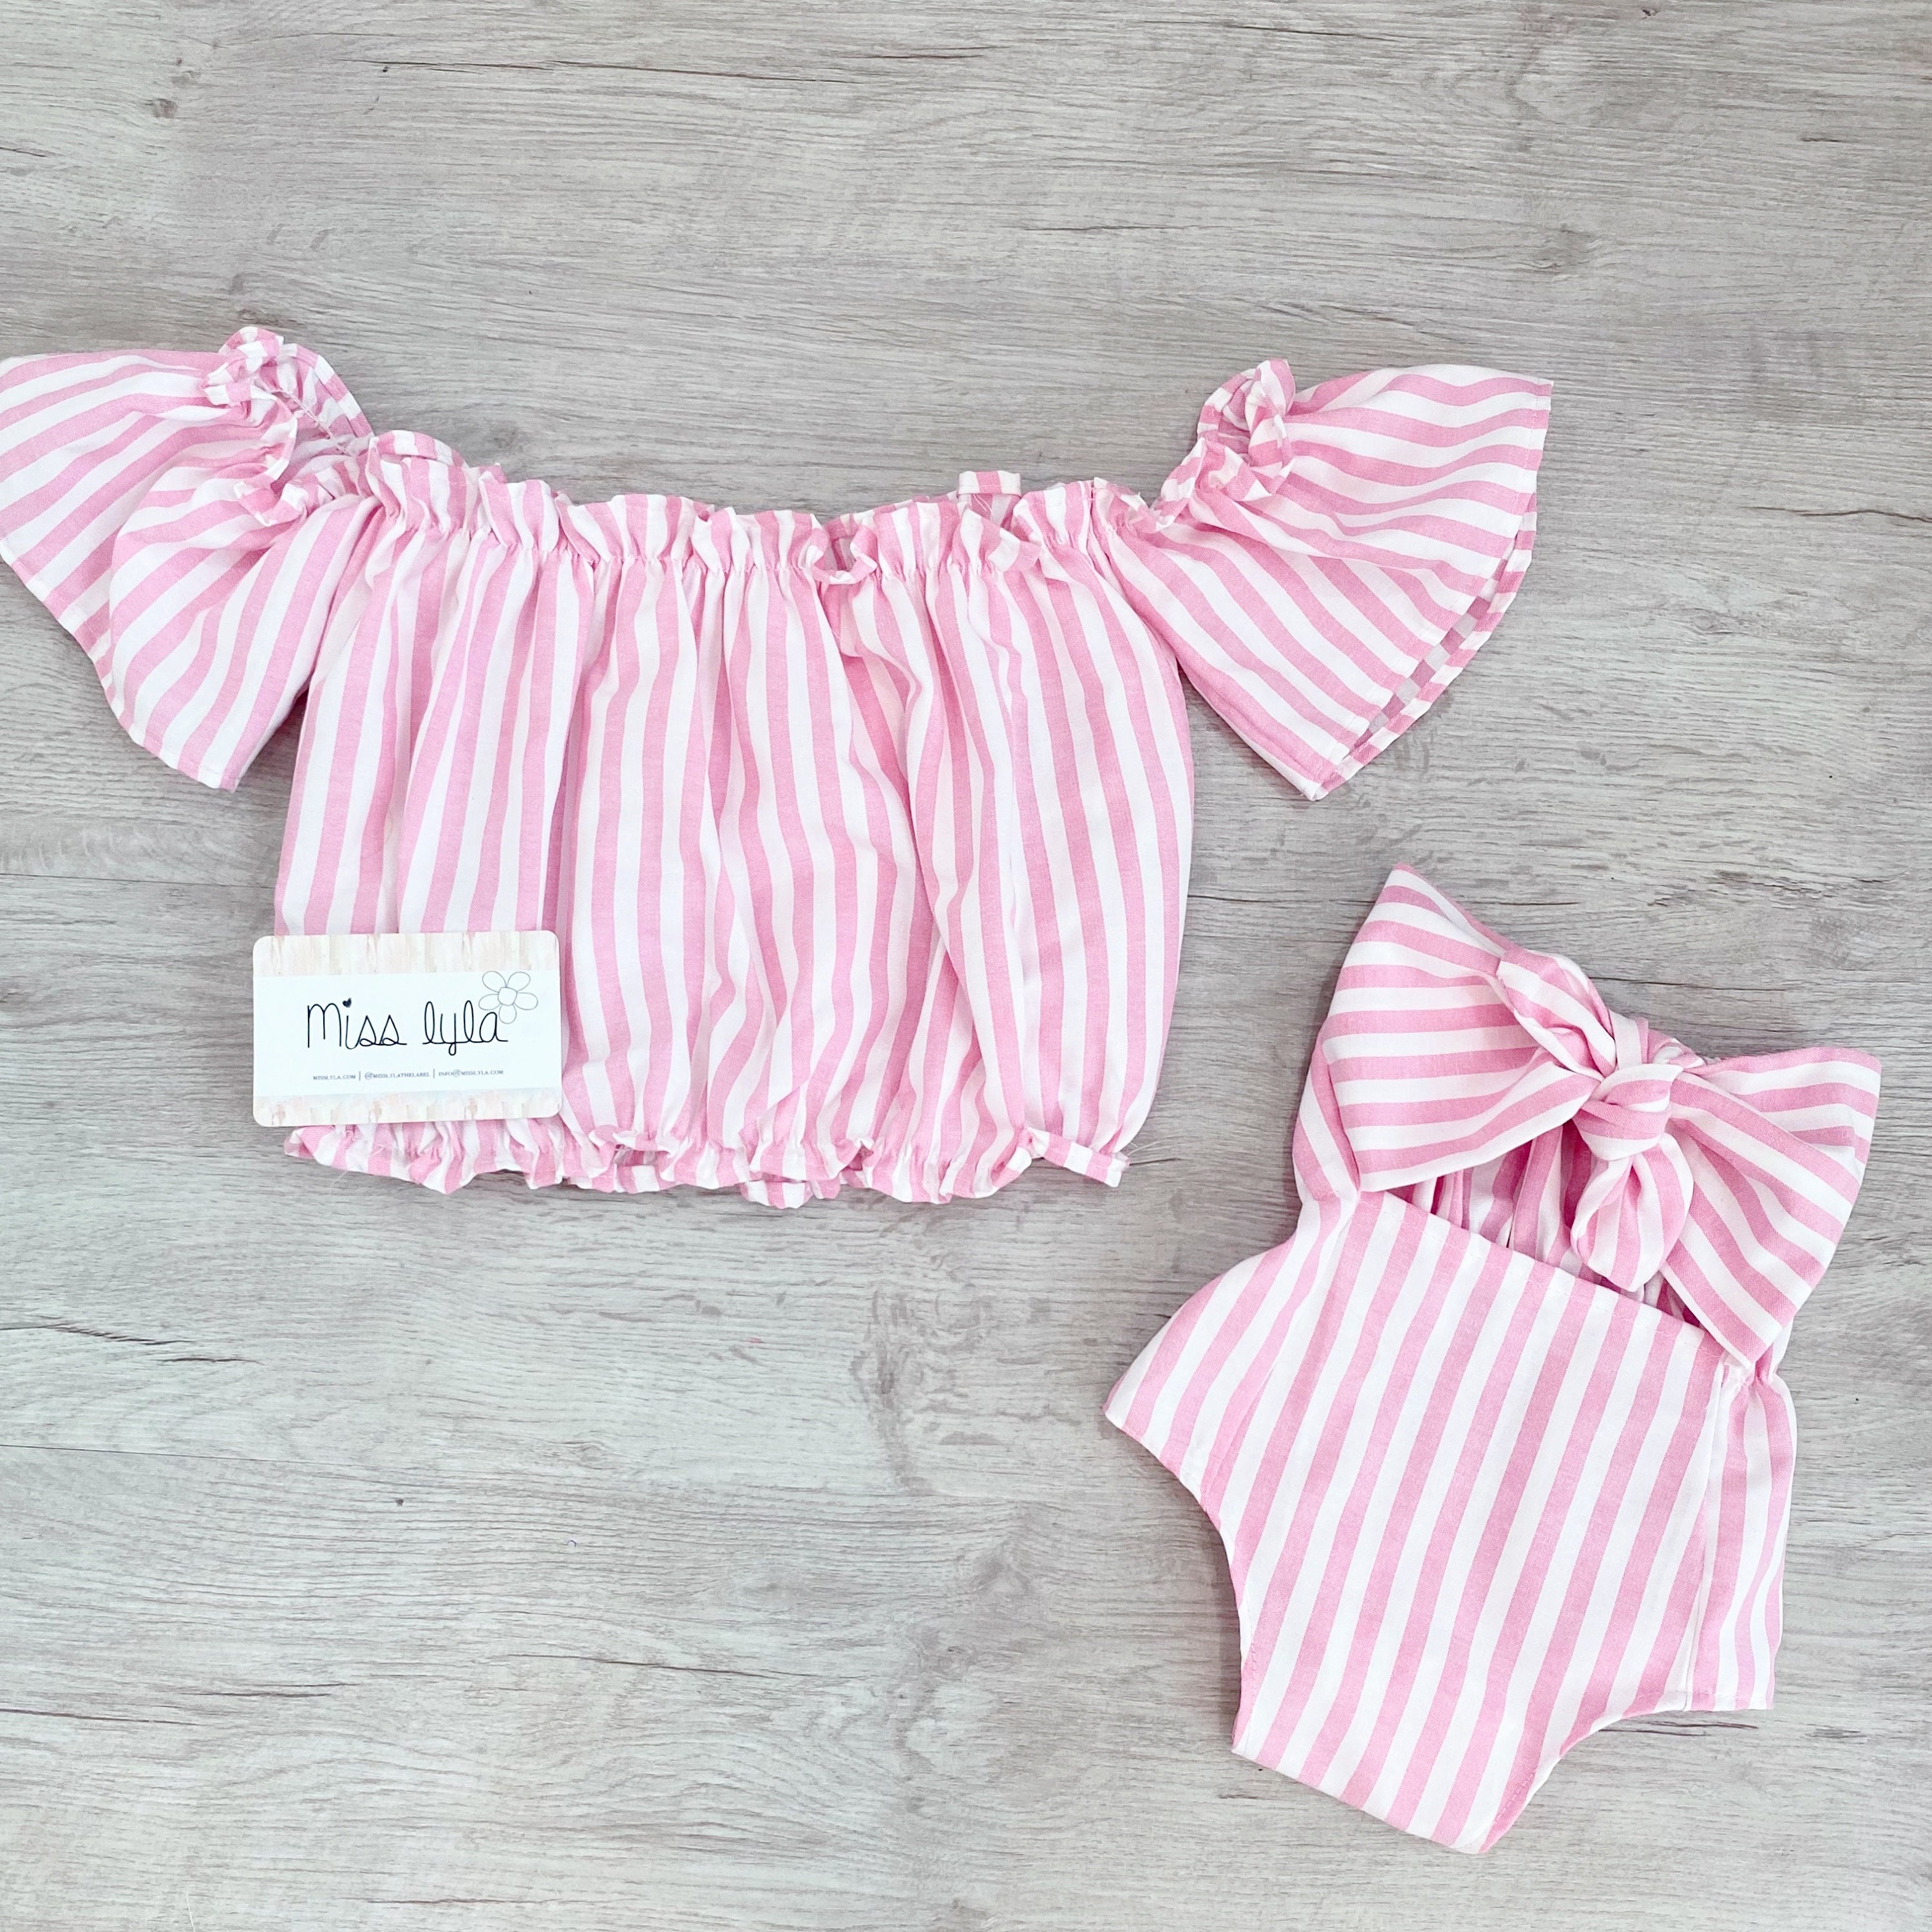 Mommy and Me Outfits Mommy and Me Matching Outfits Mother - Etsy